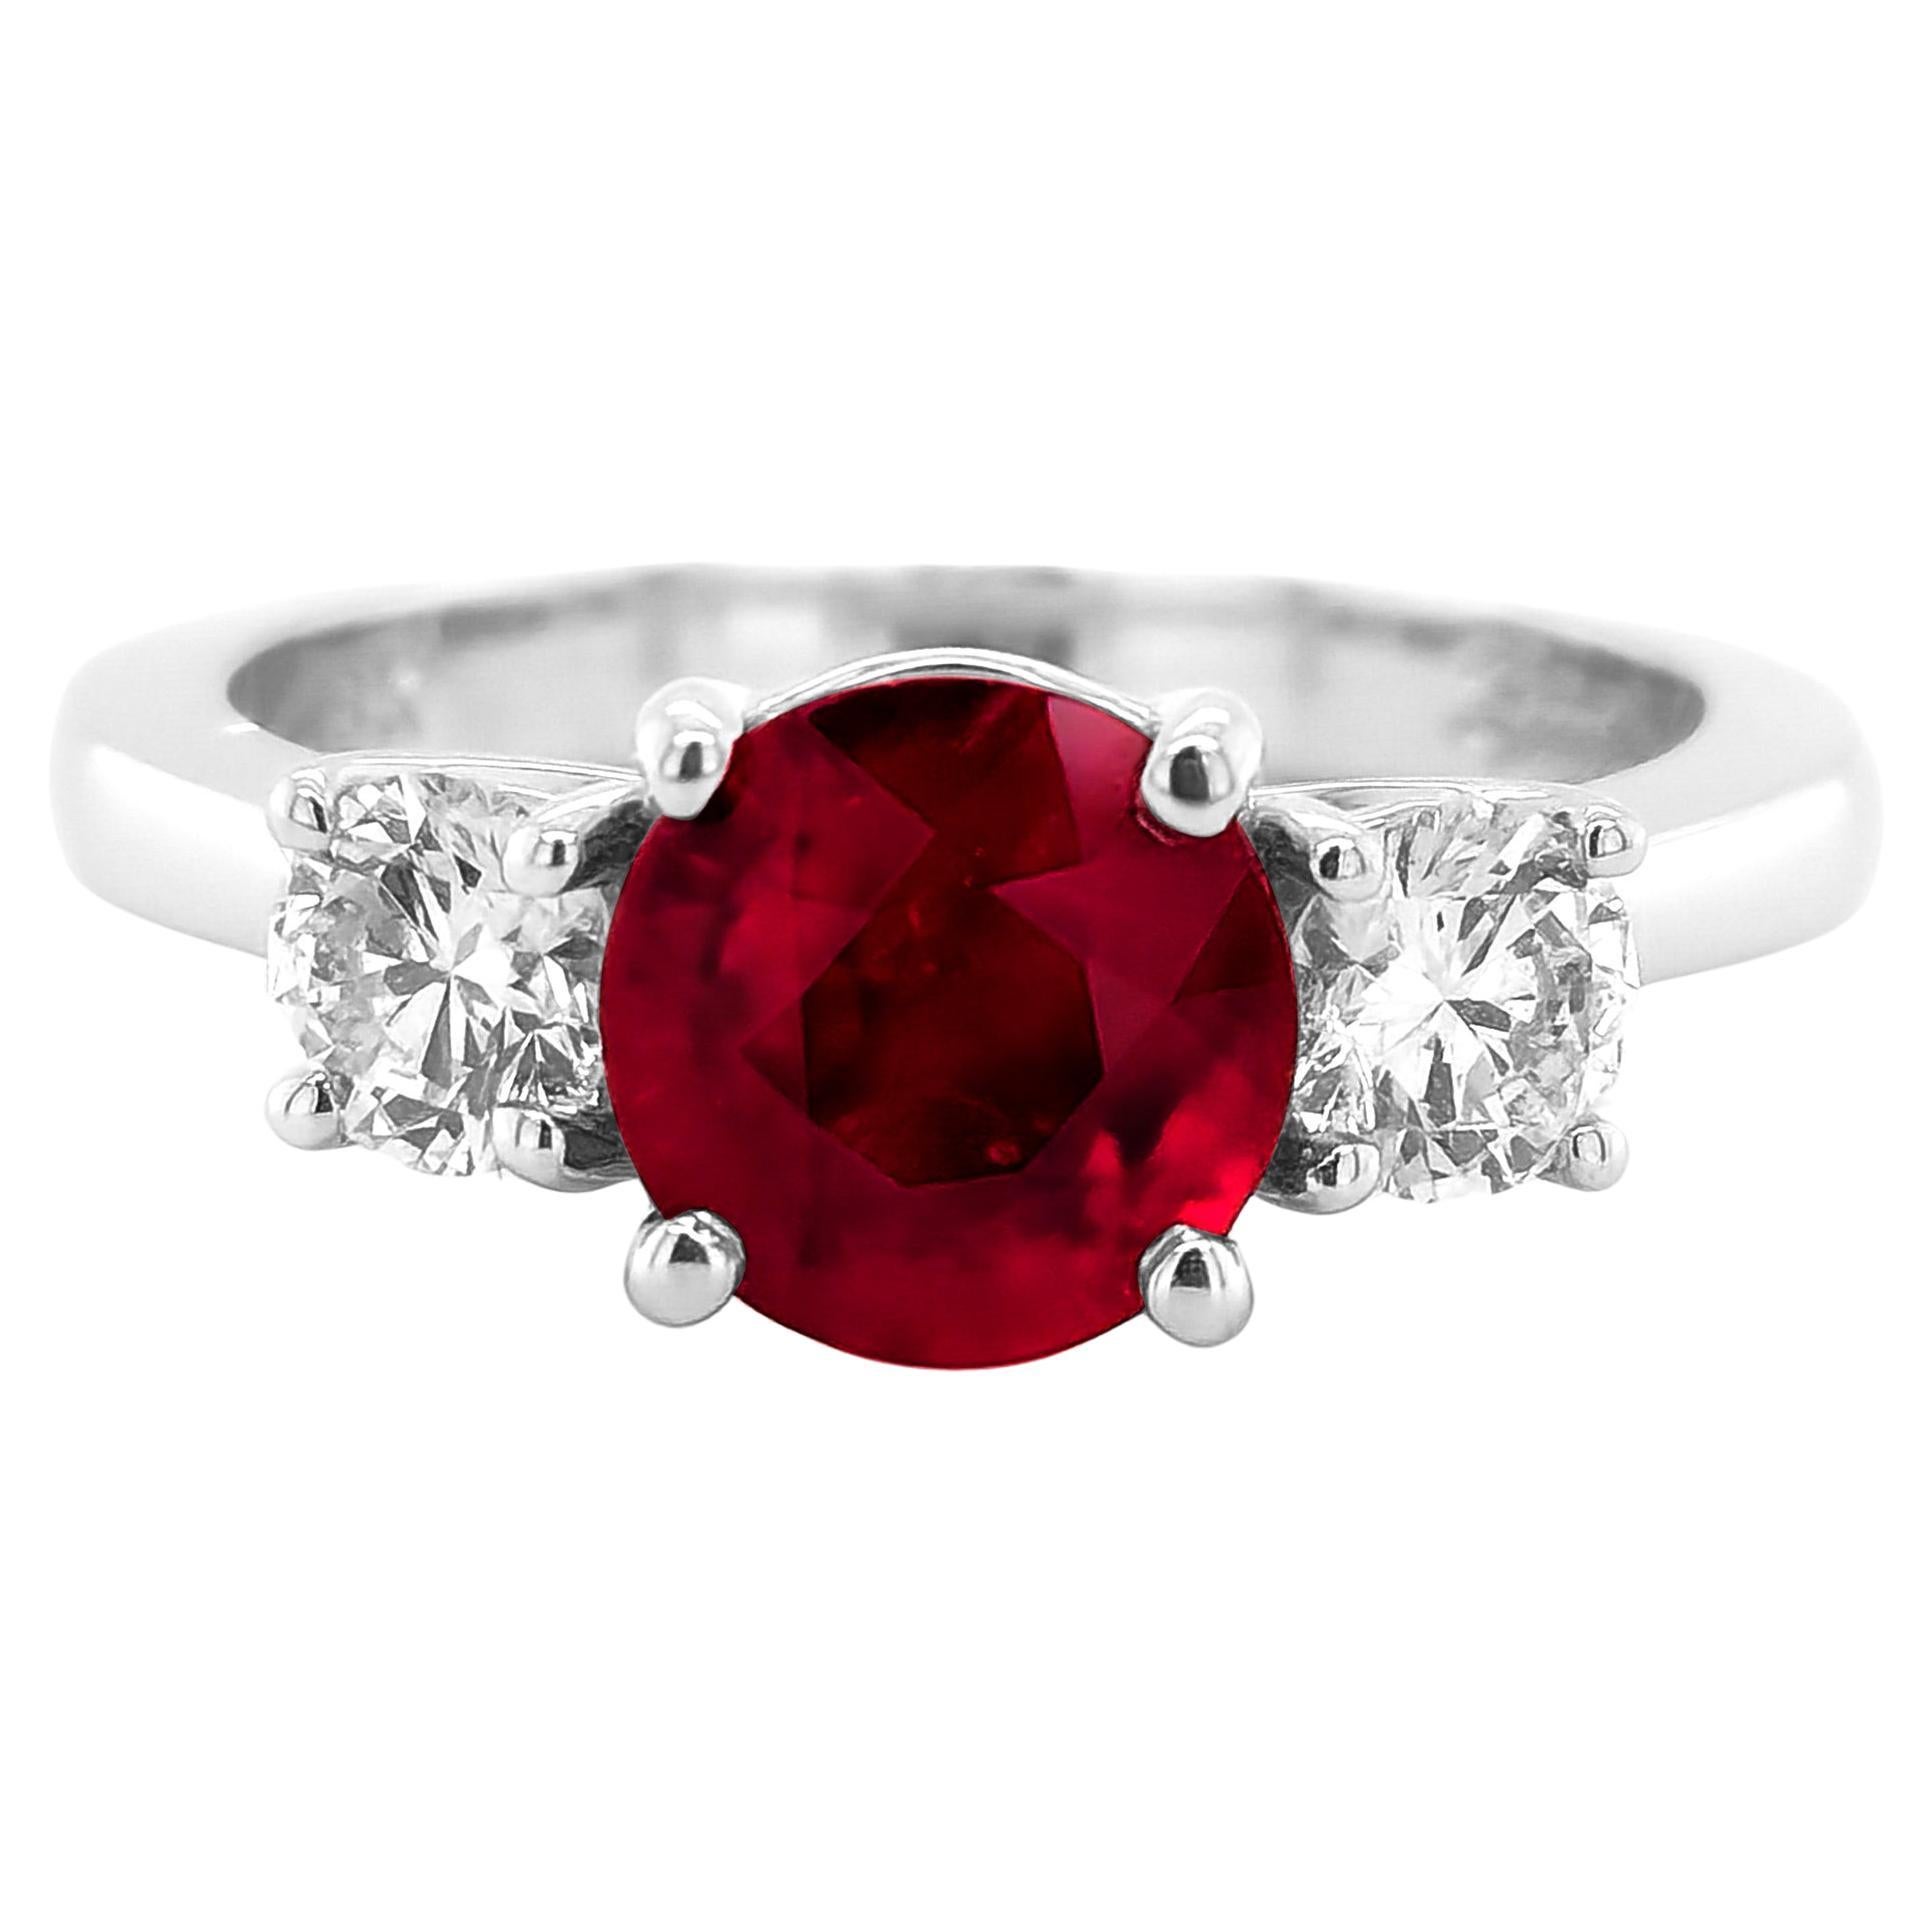 GIA Certified 1.81 Carats Burma Ruby Diamonds set in 18K White Gold Ring For Sale